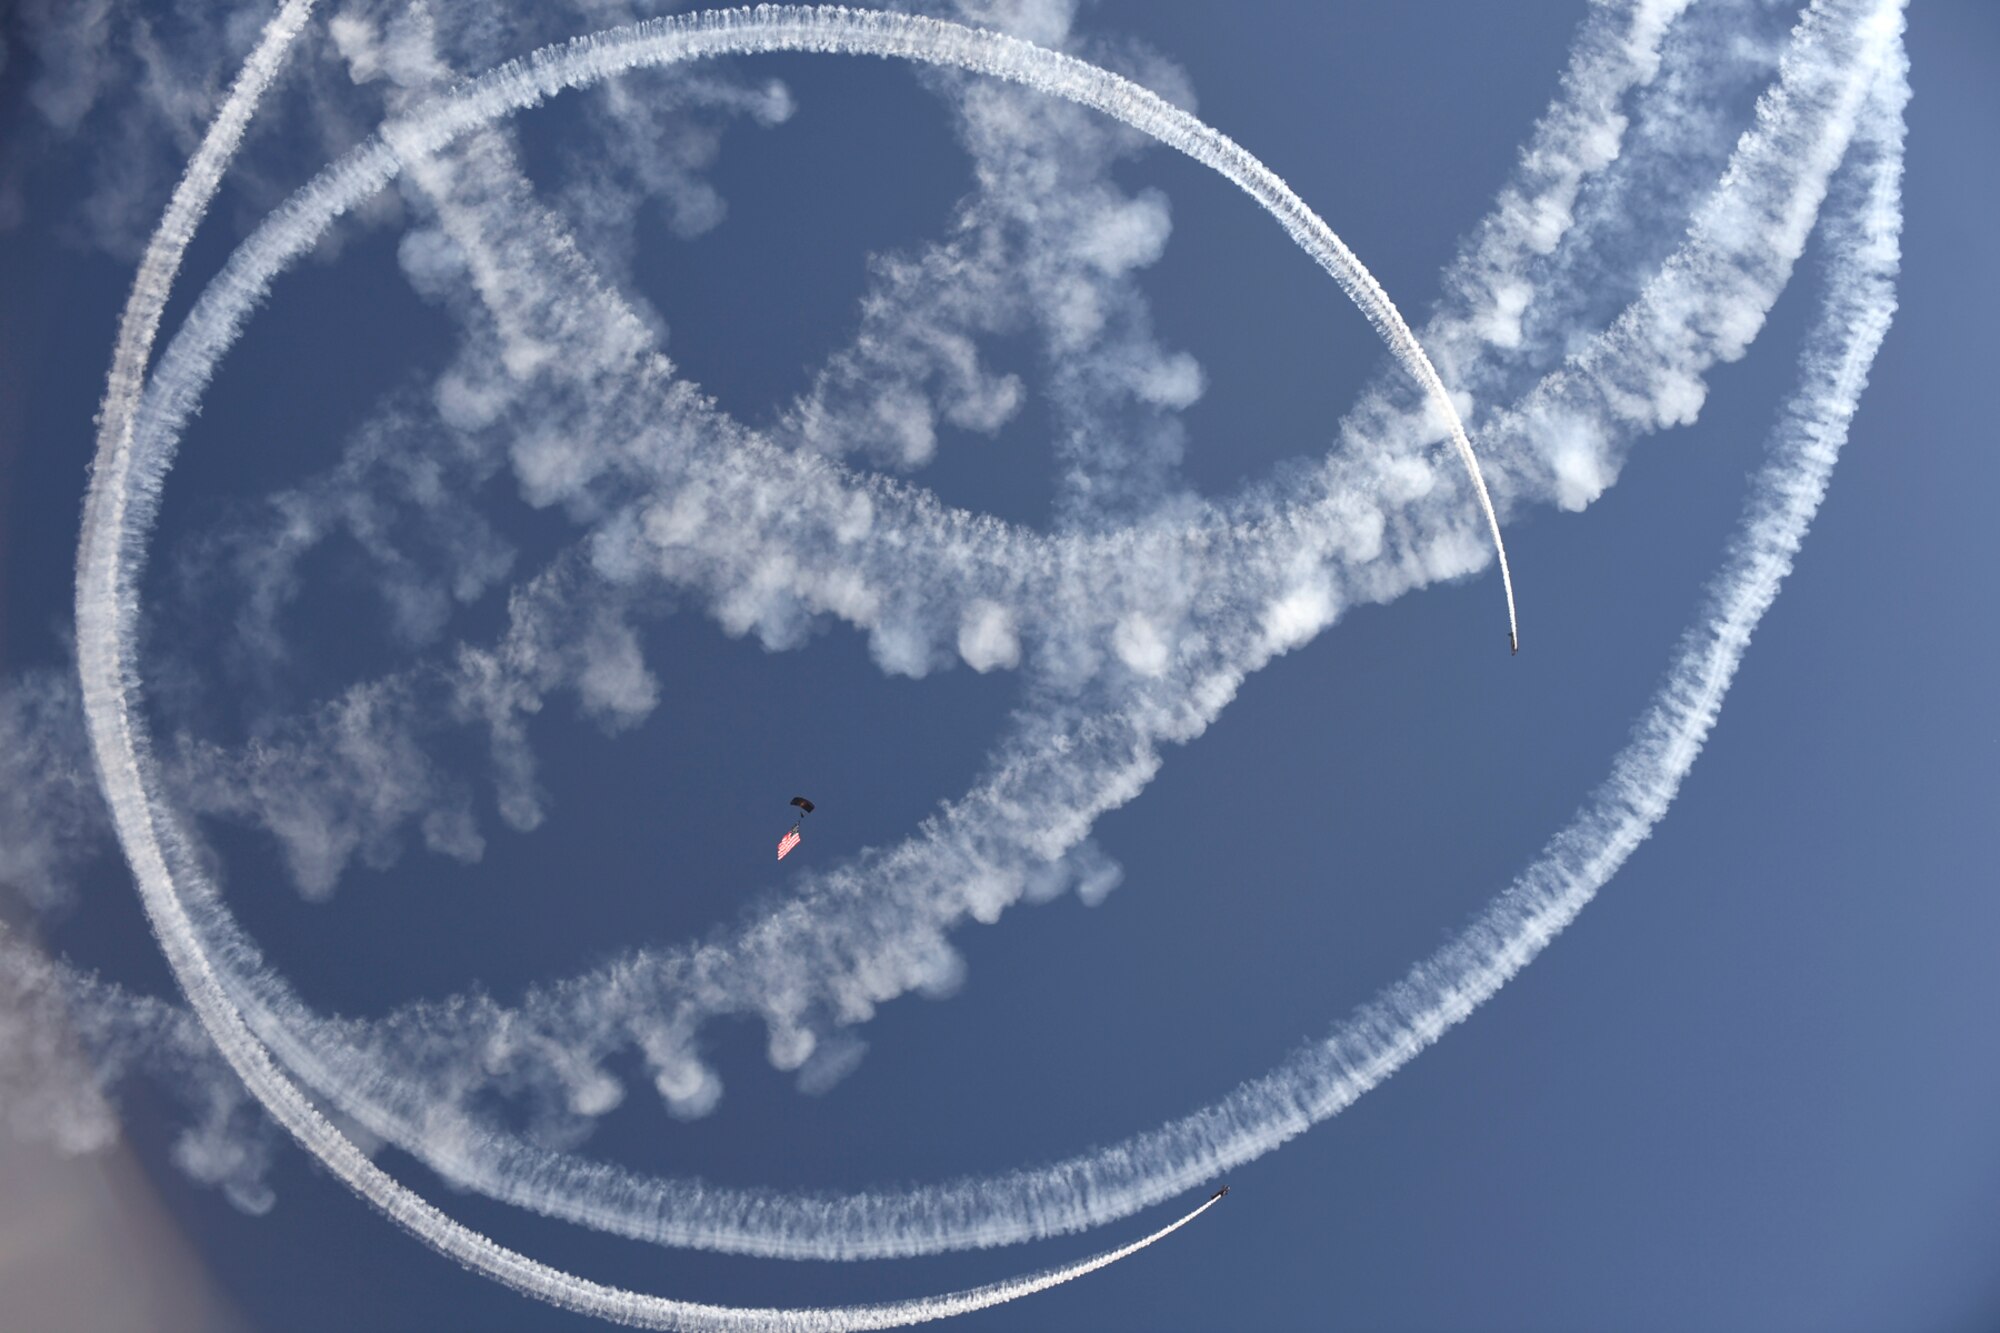 A U.S. Special Operations Command The Para-Commandos parachute demonstration team member performs a National Anthem flag jump while two aerobatic aircraft performers circle overhead during the Warriors Over the Wasatch Air and Space Show June 24, 2018, at Hill Air Force Base, Utah. The Para-Commandos are comprised of active duty special operators, such as Army Special Forces, Army Rangers, Navy SEALs, Air Force Combat Controllers and Marine Raiders. (U.S. Air Force photo by Todd Cromar)